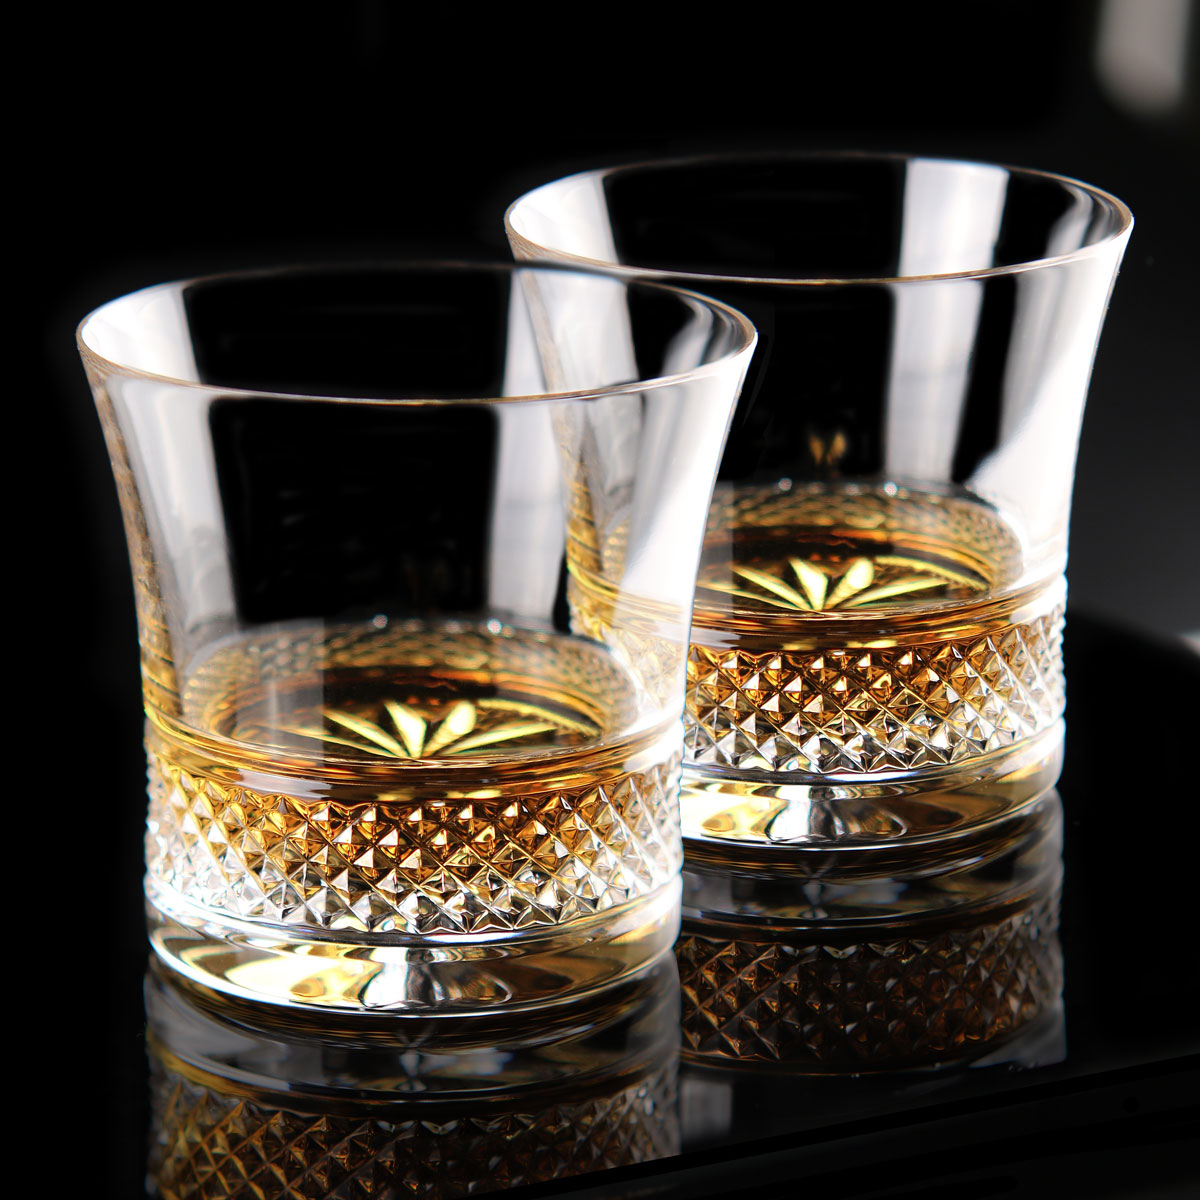 Cashs Ireland, Annestown King Size 3Of Scotch Crystal Whiskey Glasses, 1+1 Free